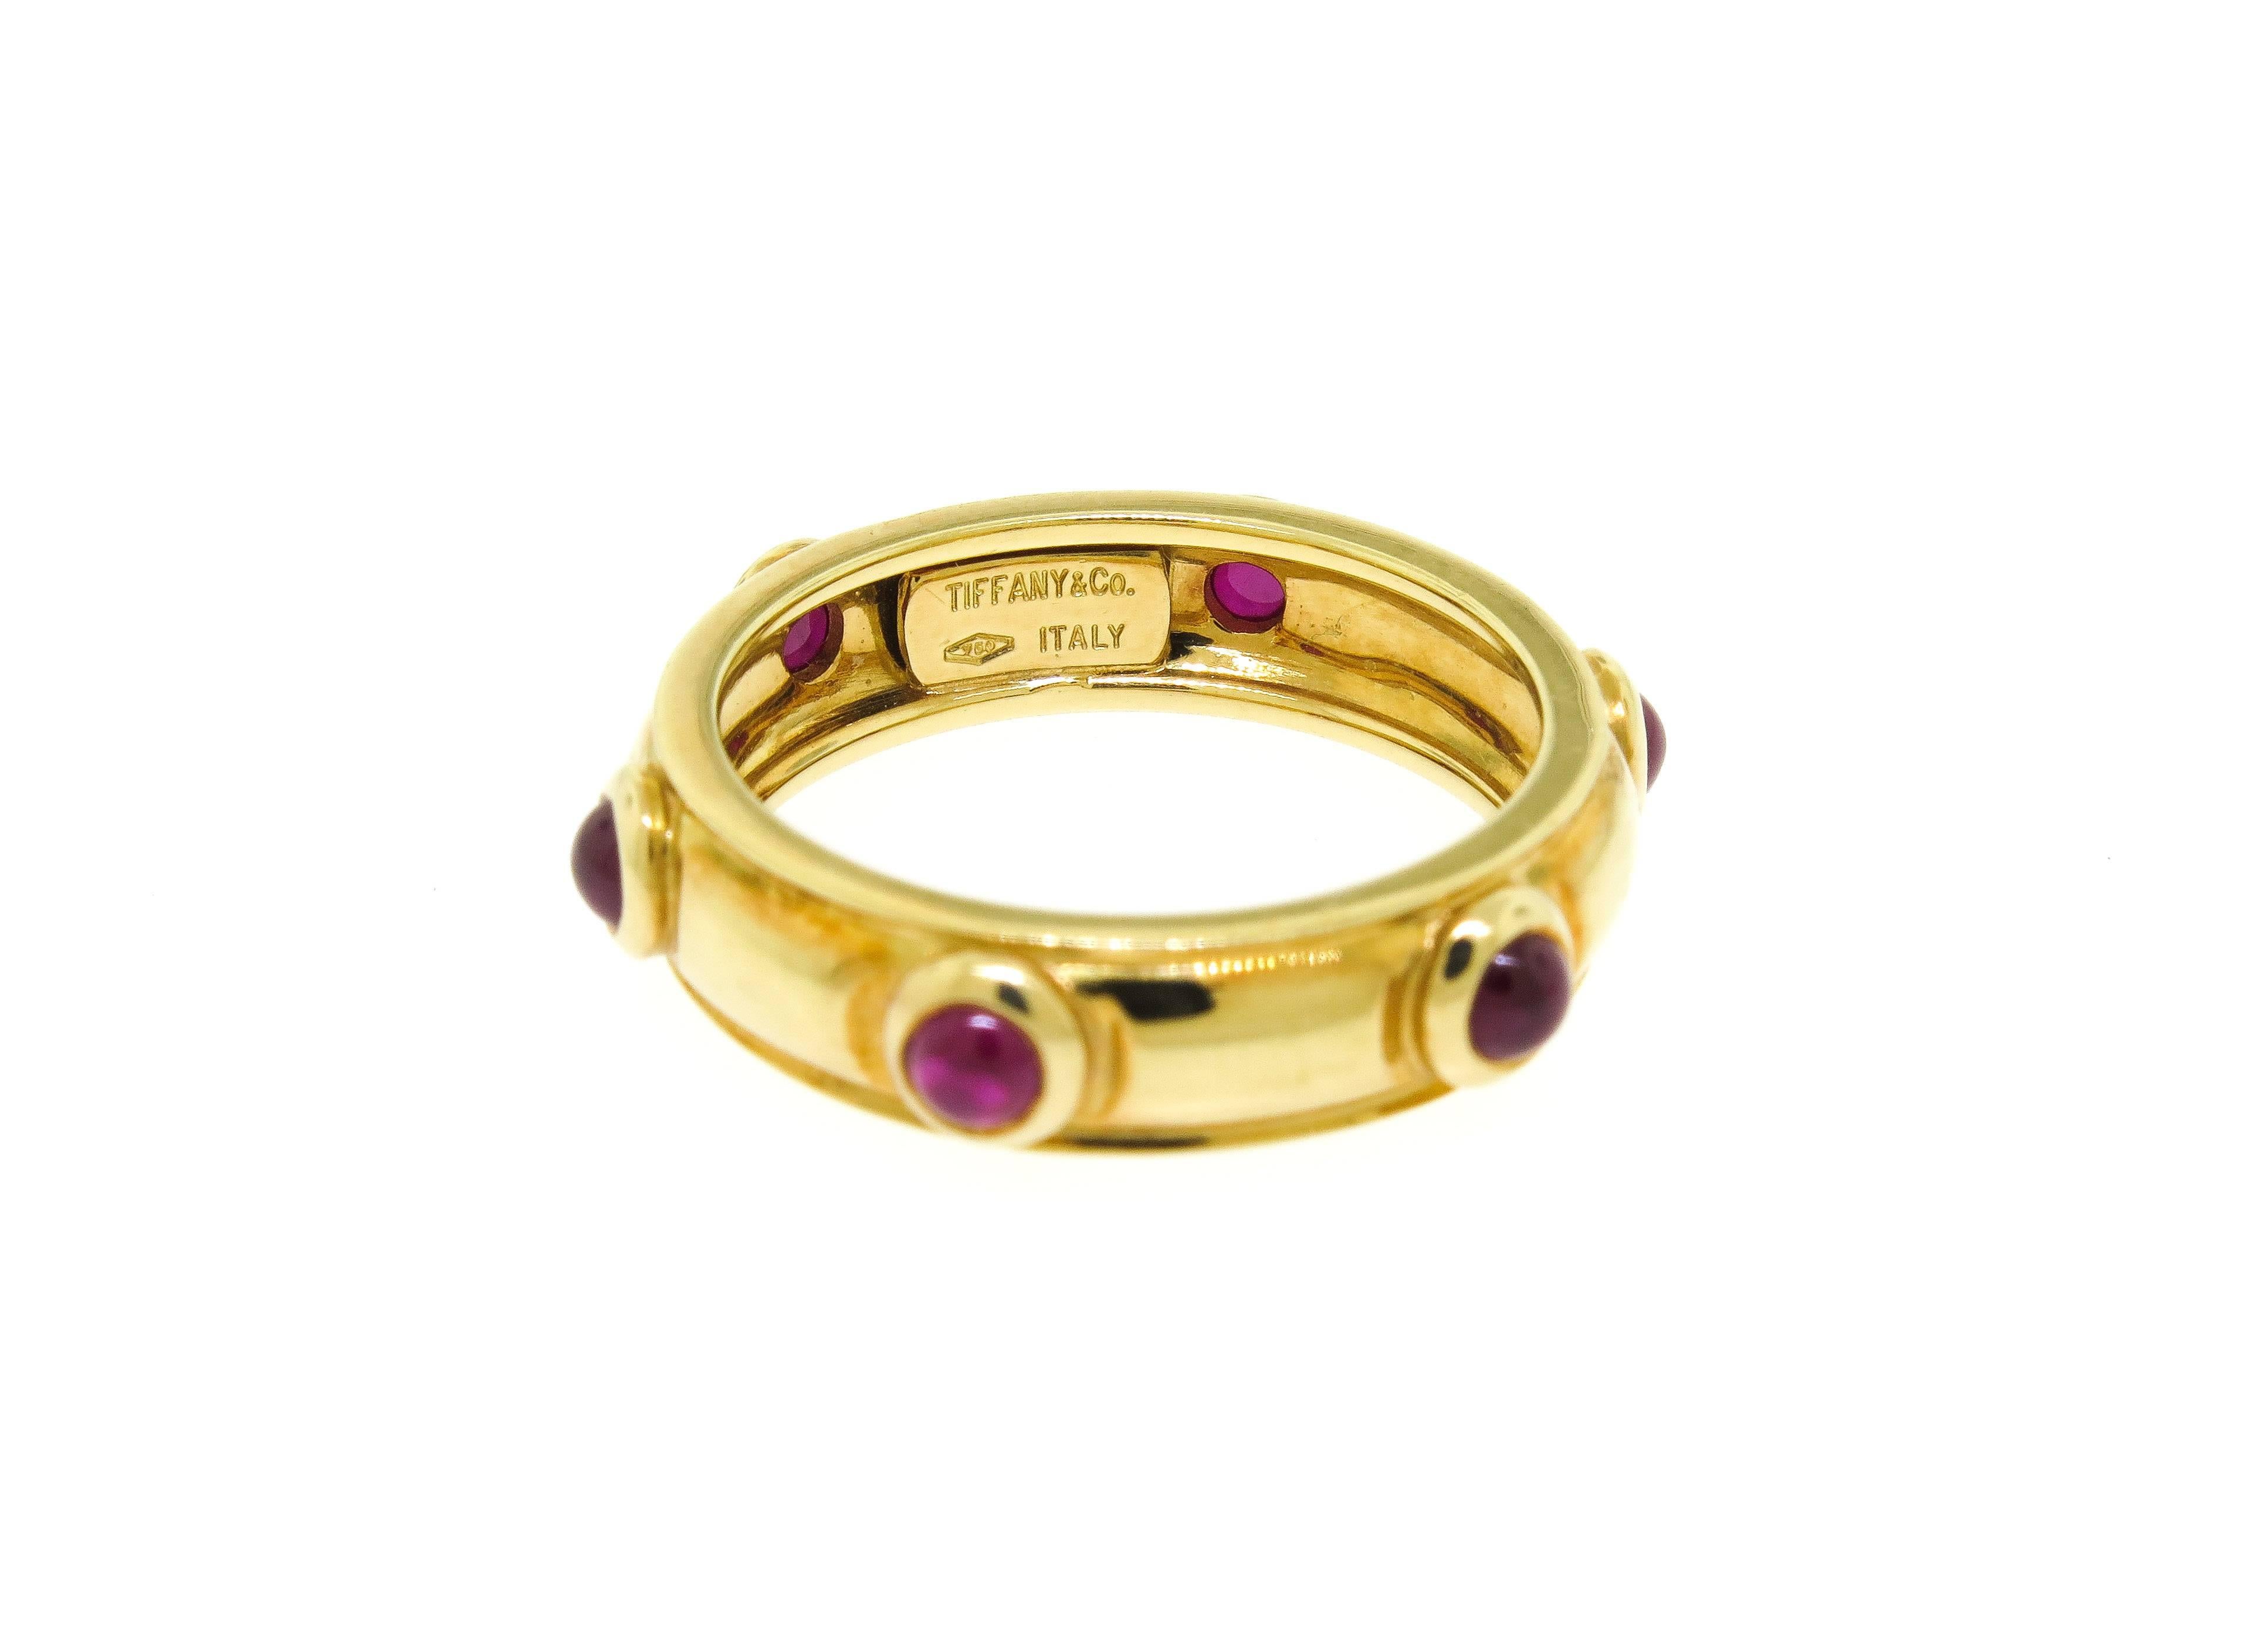 Chic ring created by Tiffany & Co. Made of 18k yellow gold and set with 6 cabochon rubies. The ring is size 7.25. It is stamped with Tiffany & Co. maker's  hallmark. Beautiful and wearable as a stackable, or to enjoy on its own. 